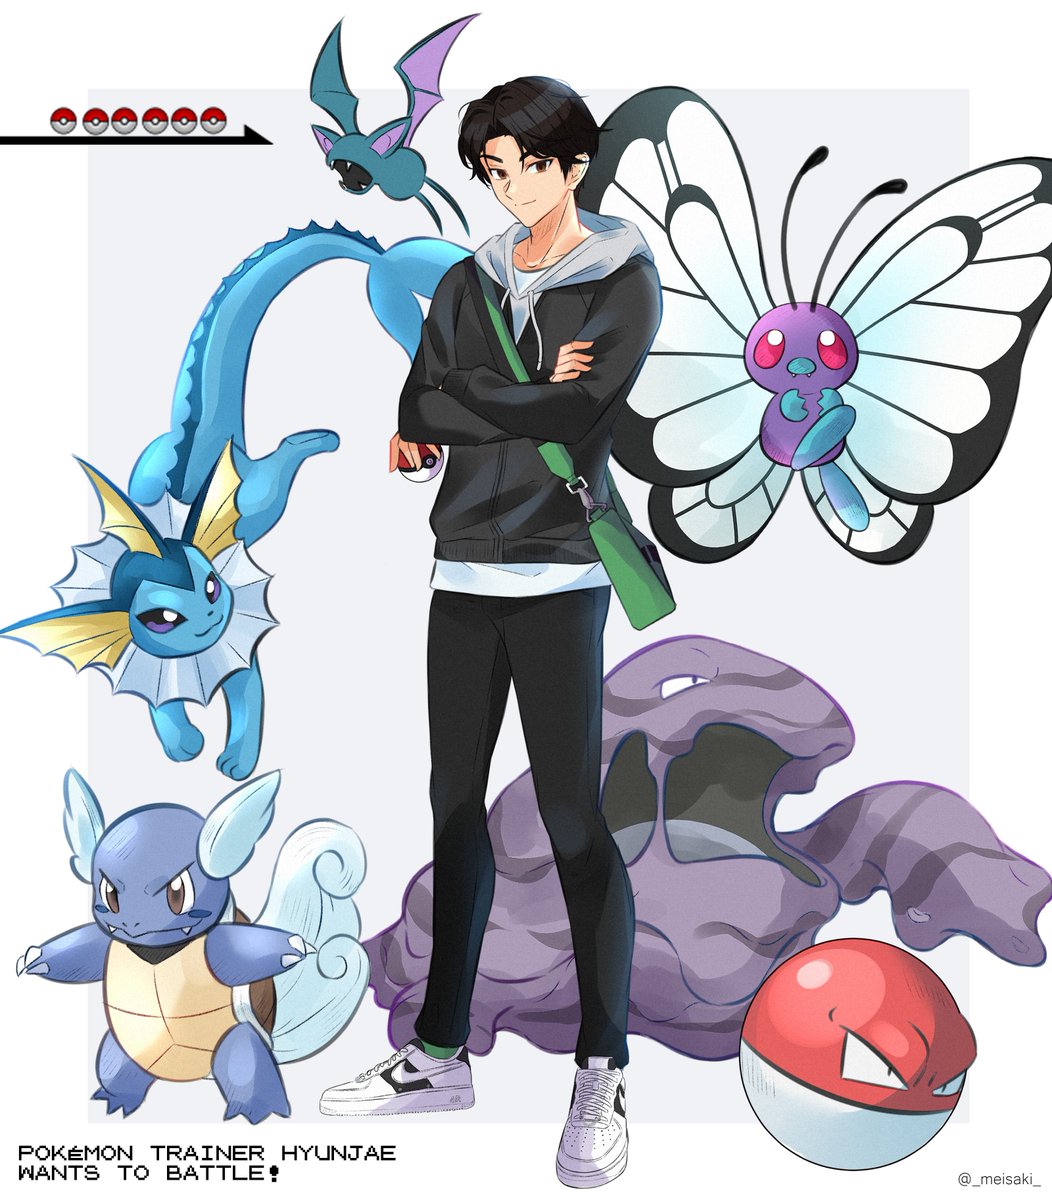 「hyunjae from tbz as a pokémon trainer be」|𝗺𝗲𝗶のイラスト